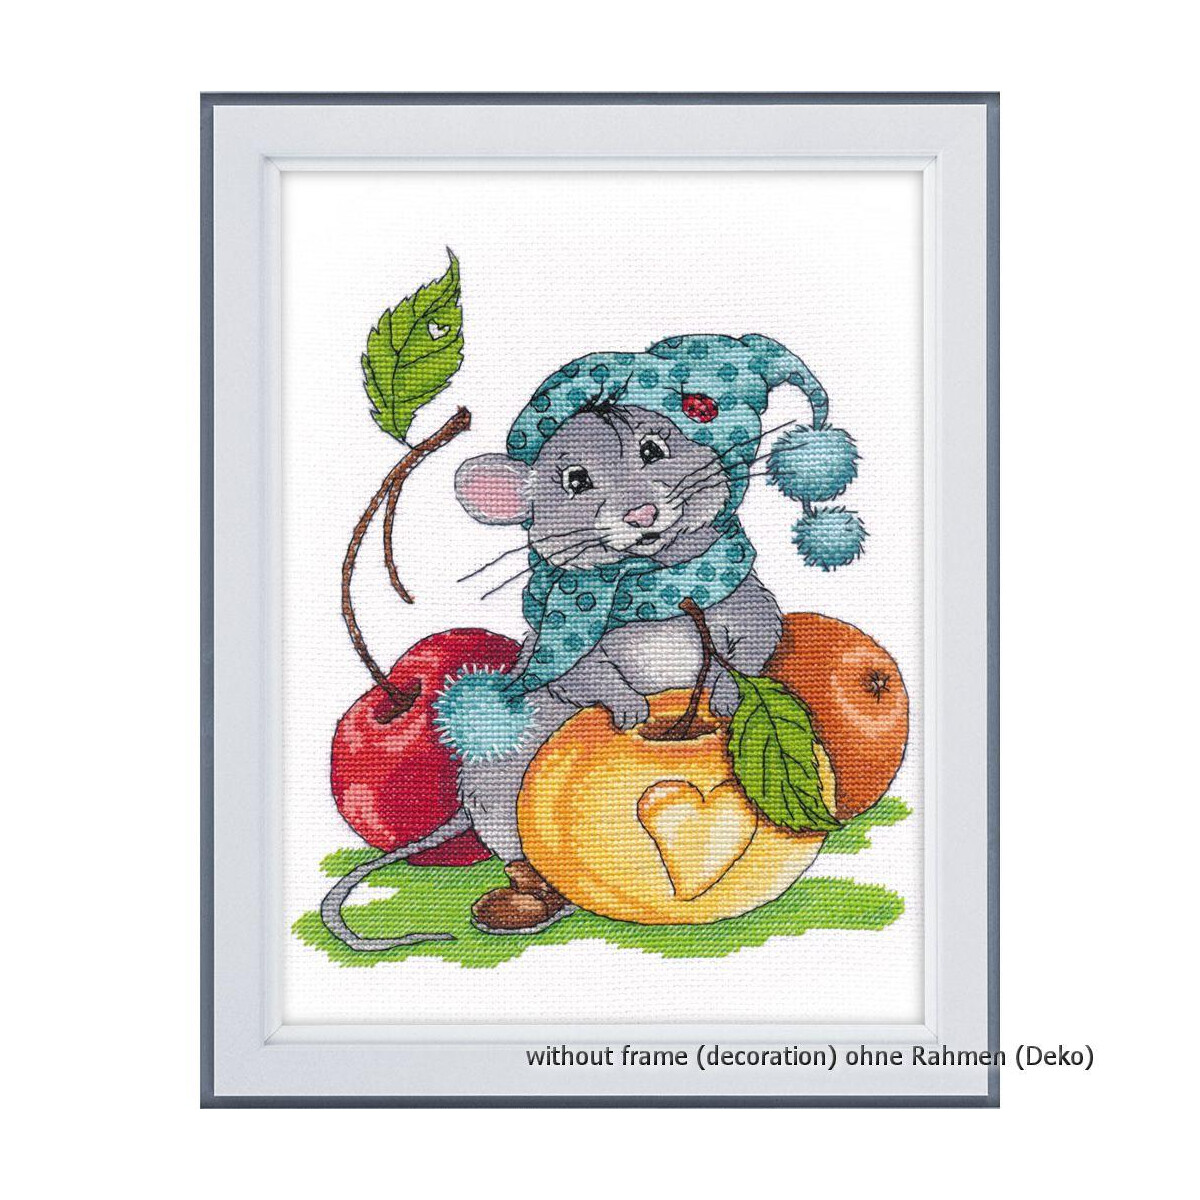 Oven counted cross stitch kit "Thrifty mouse",...